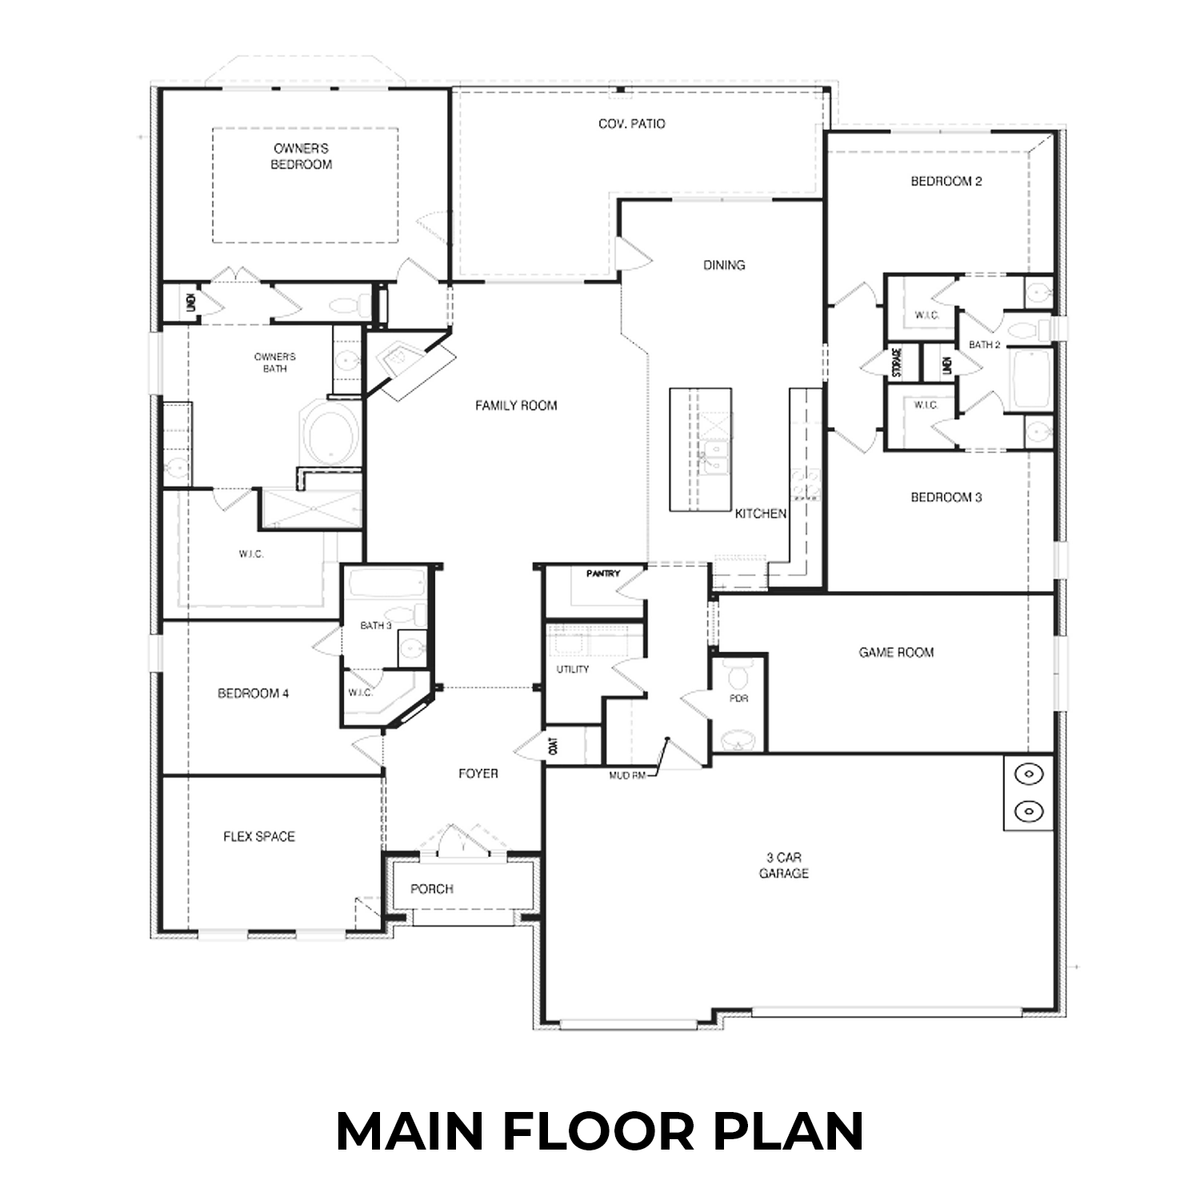 1 - The Garner A buildable floor plan layout in Davidson Homes' Ladera community.